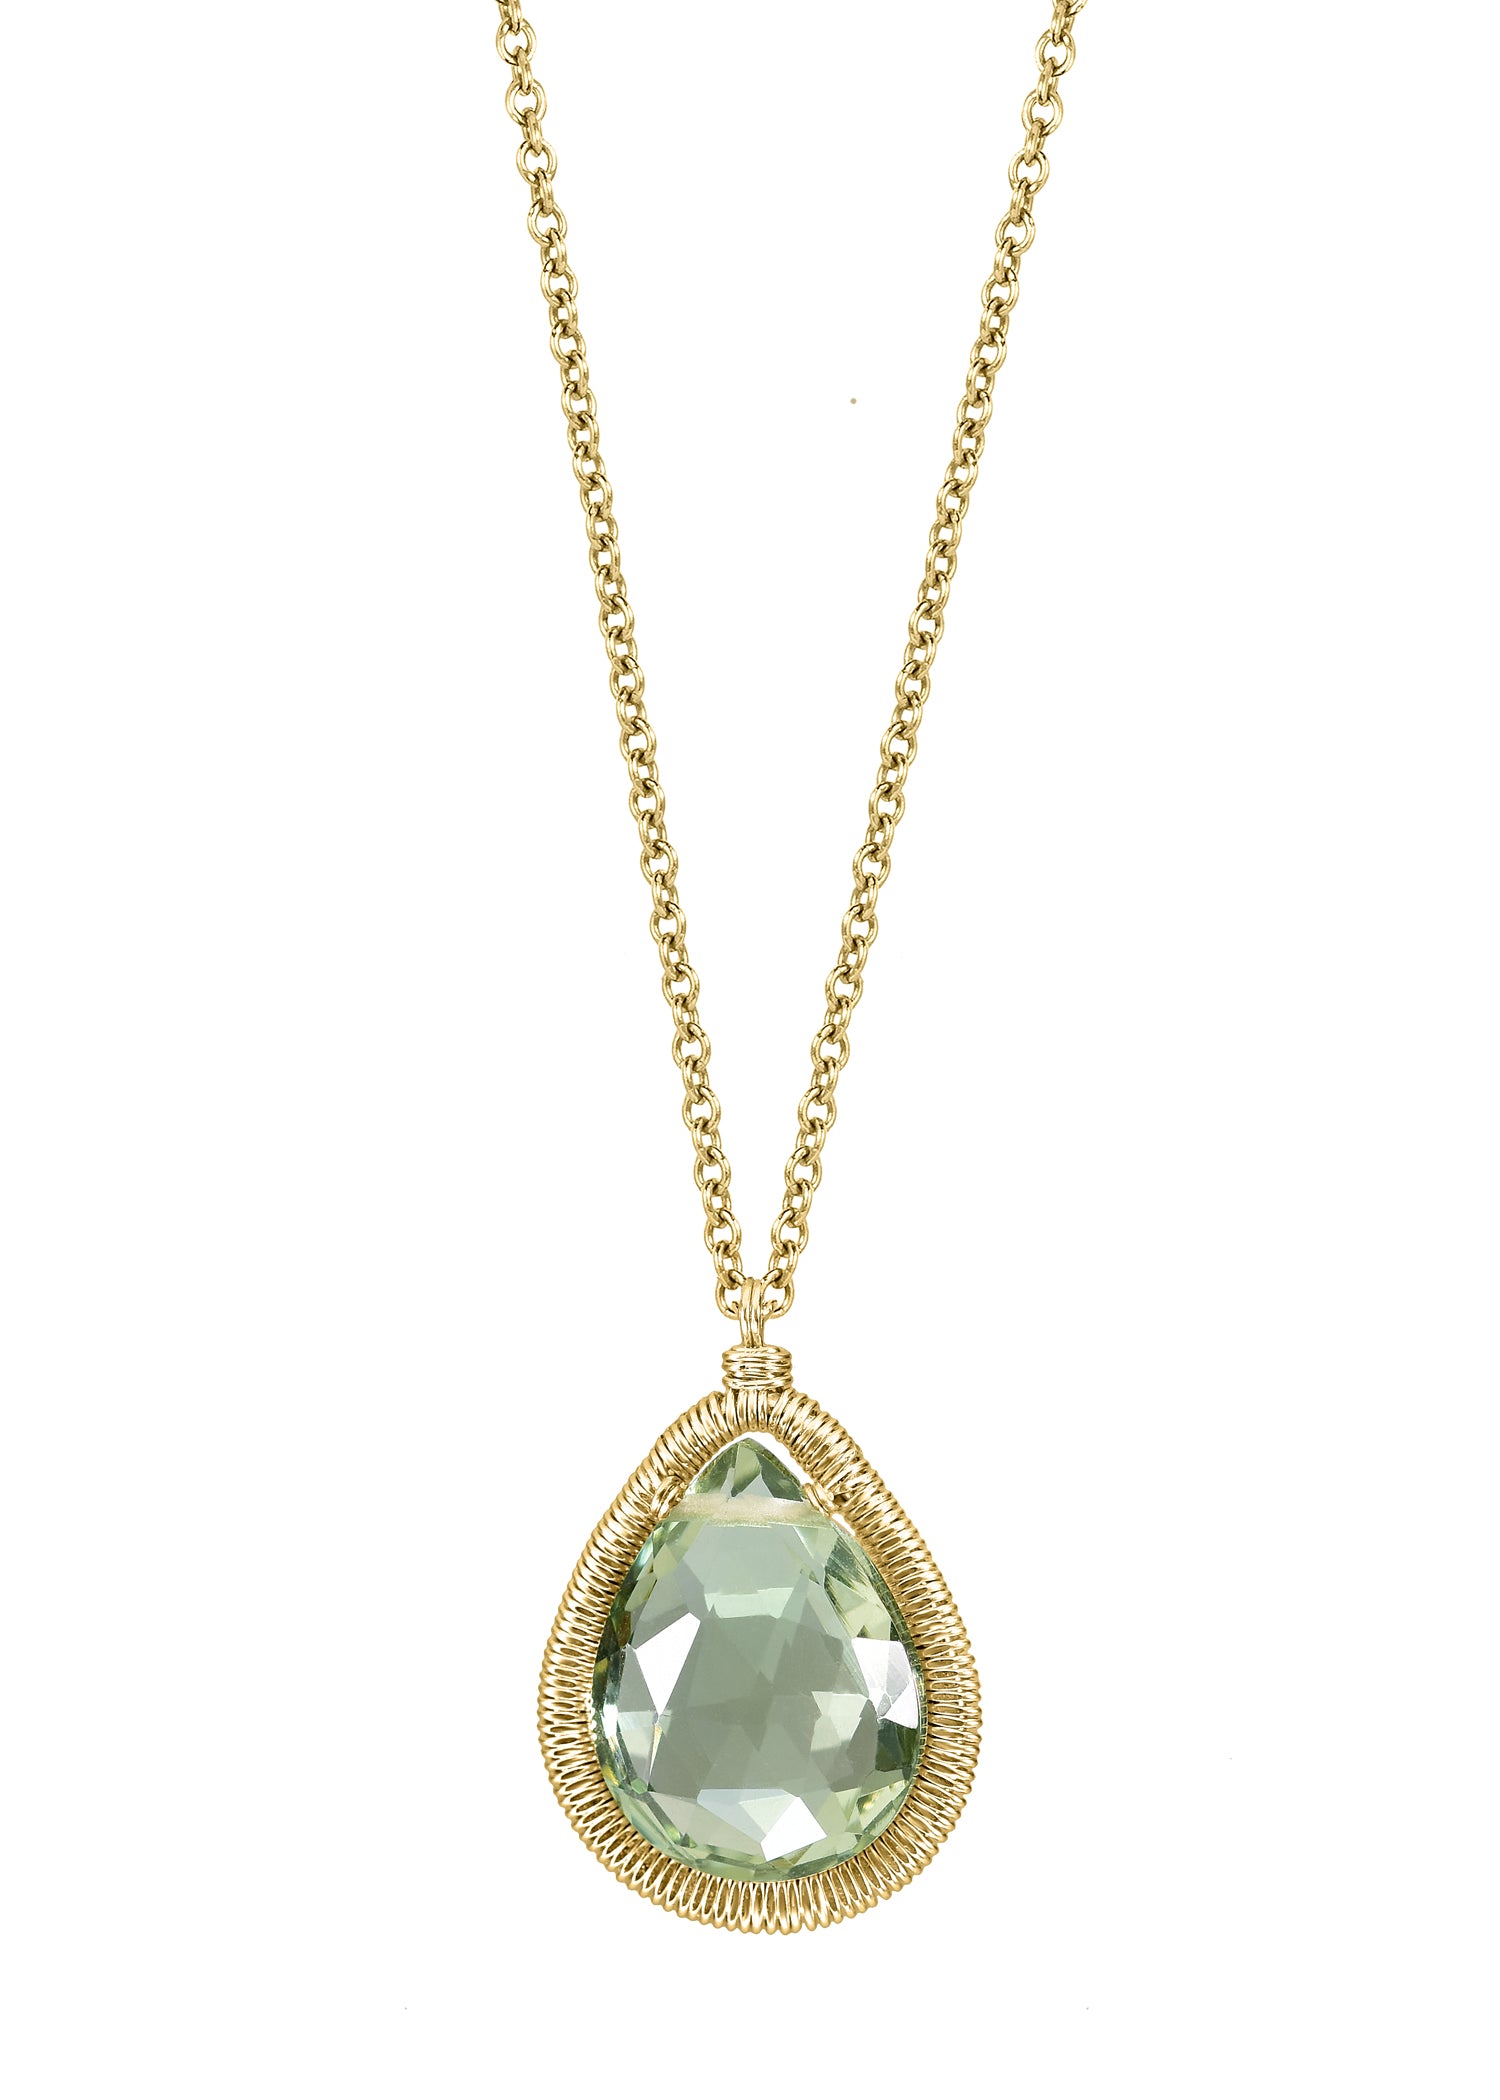 Green quartz 14k gold fill Necklace measures 16-3/4" in length Pendant measures 5/8" in length and 1/2" in width at the widest point Handmade in our Los Angeles studio